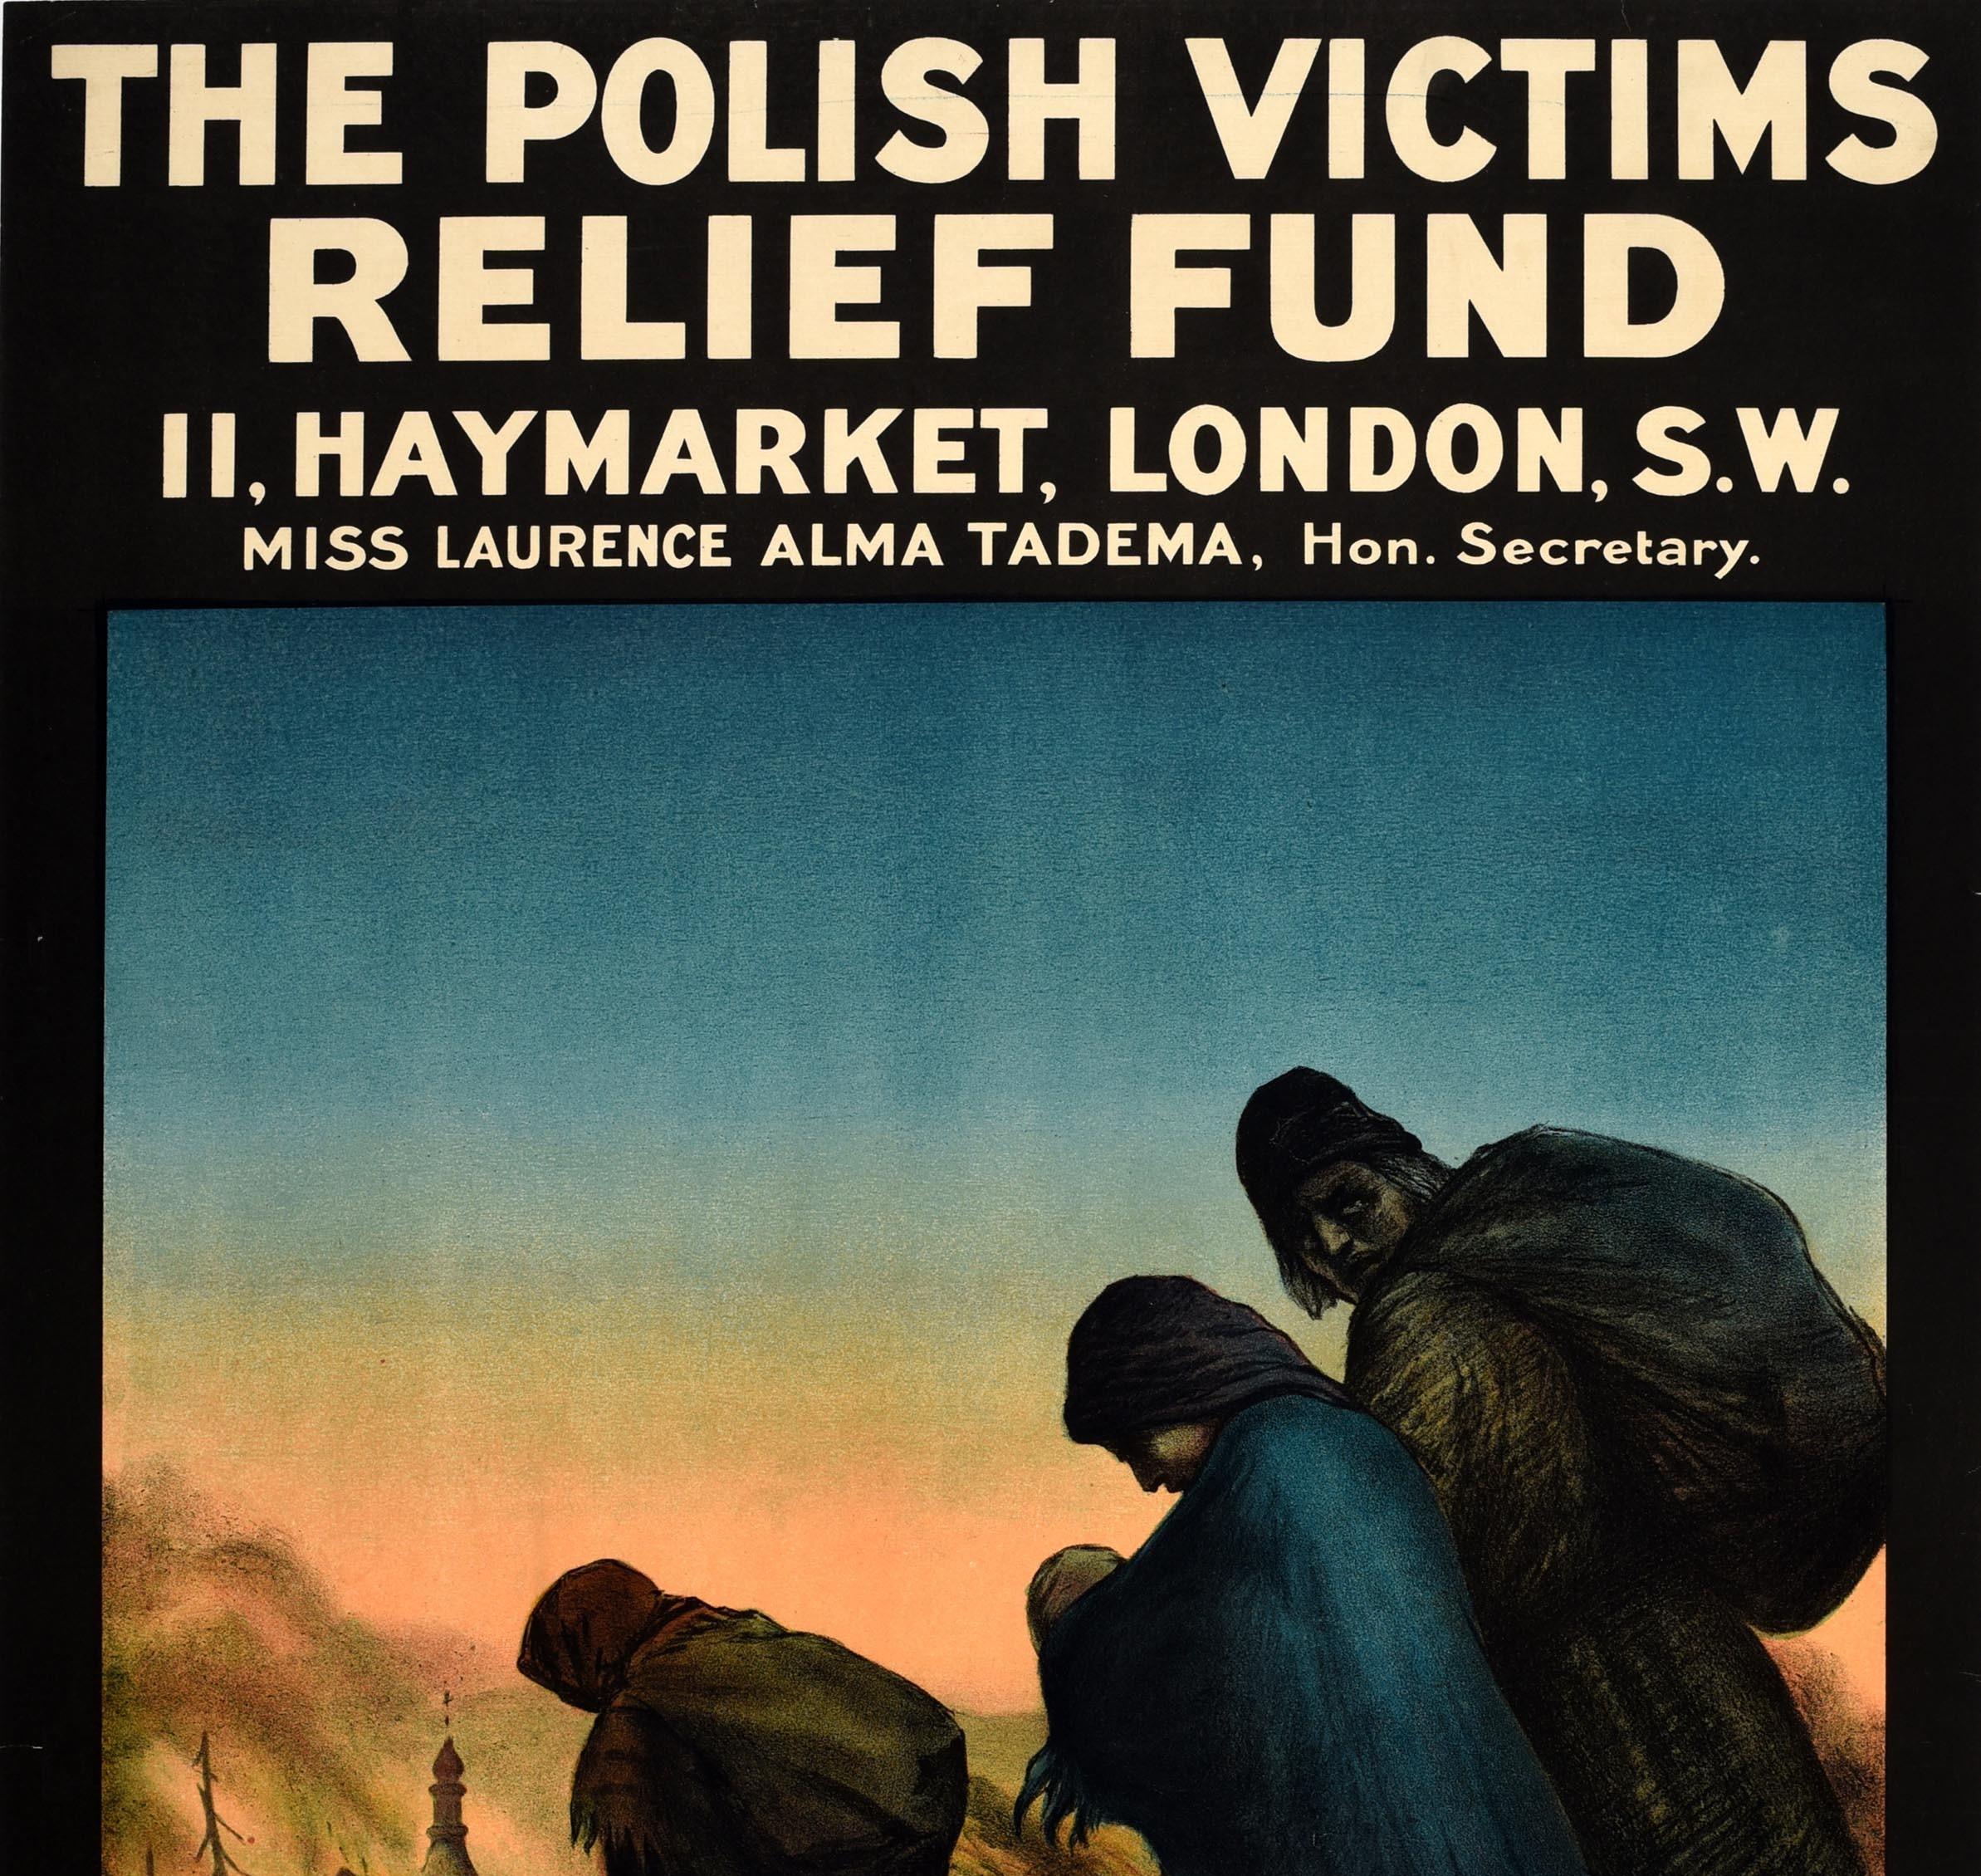 Original antique World War One fundraising poster for The Polish Victims Relief Fund featuring an image of refugees in ragged clothing holding their belongings, walking through the mud past a fire in a burning church and bare trees, a lady carrying